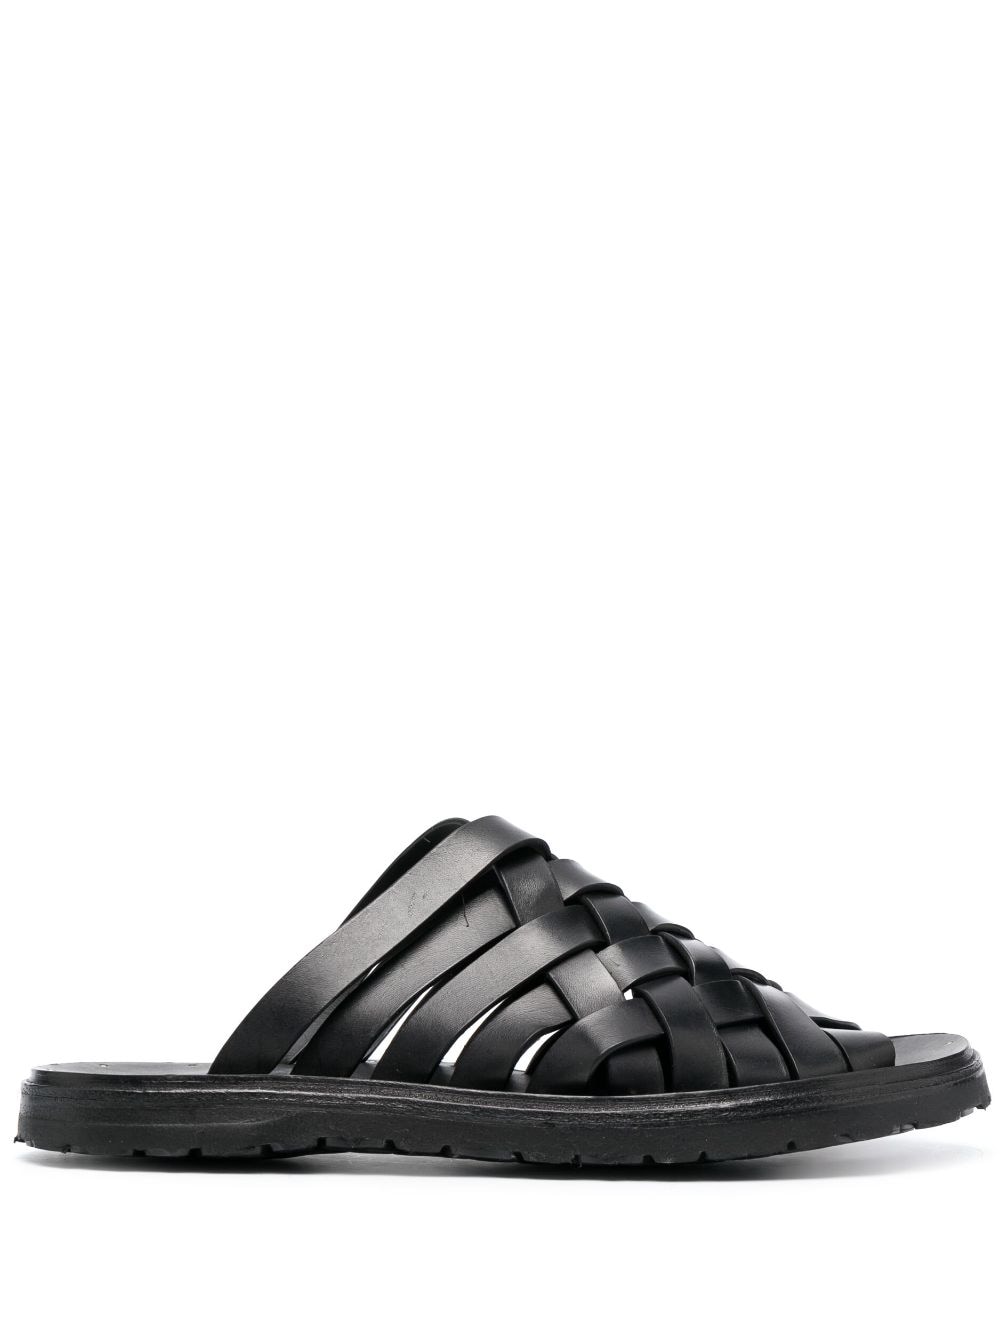 Officine Creative Chios 009 Leather Sandals In Nero